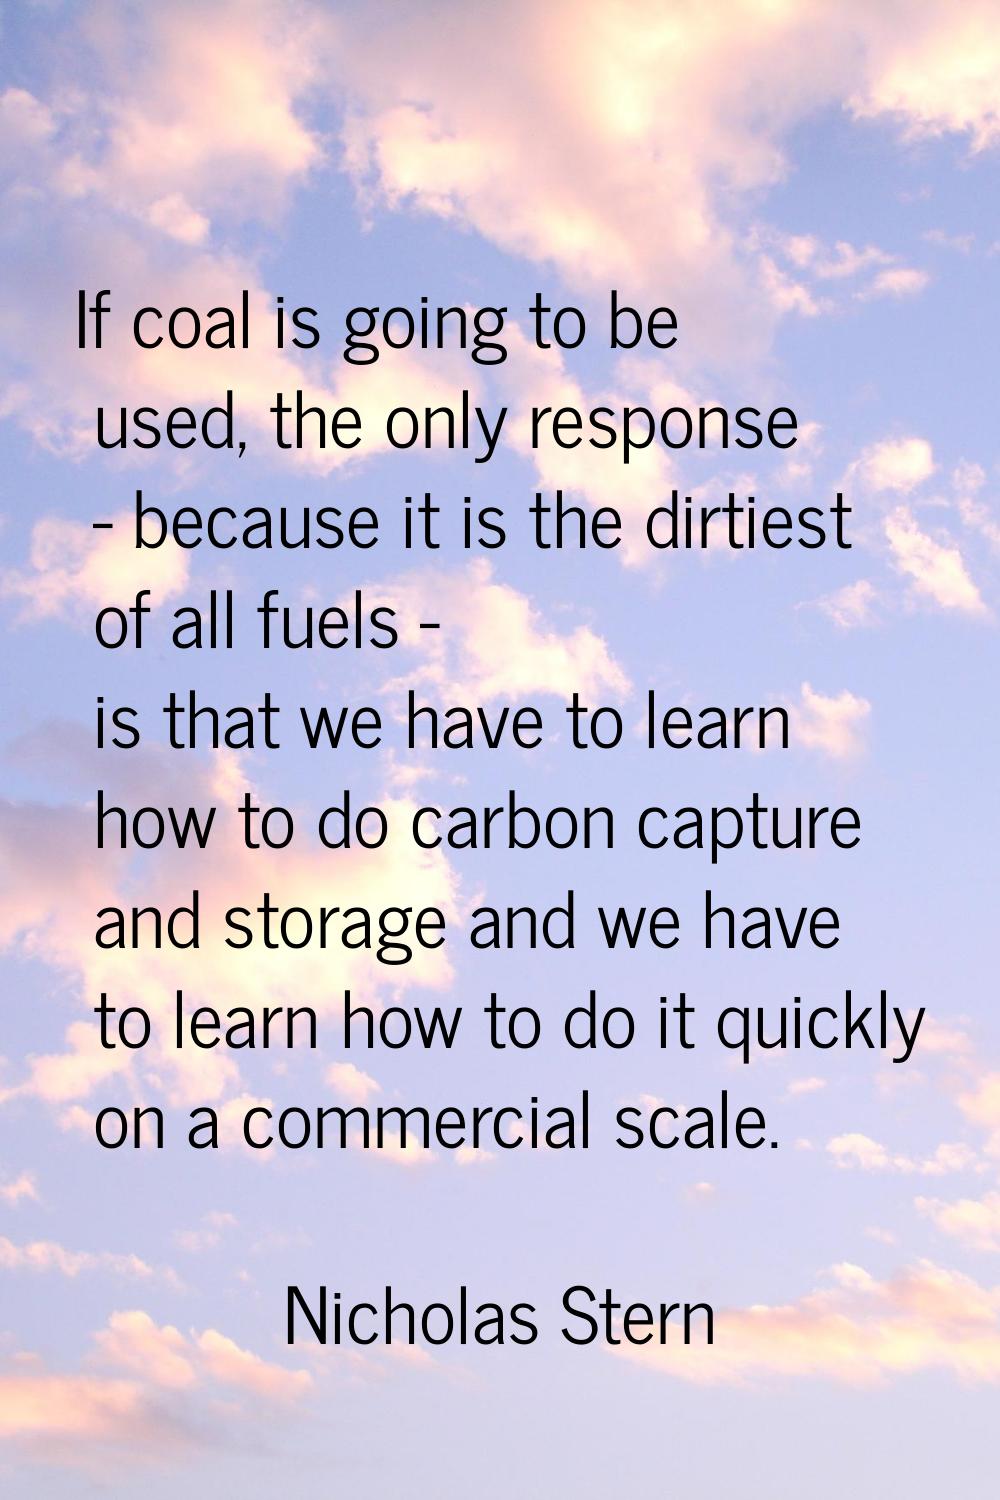 If coal is going to be used, the only response - because it is the dirtiest of all fuels - is that 